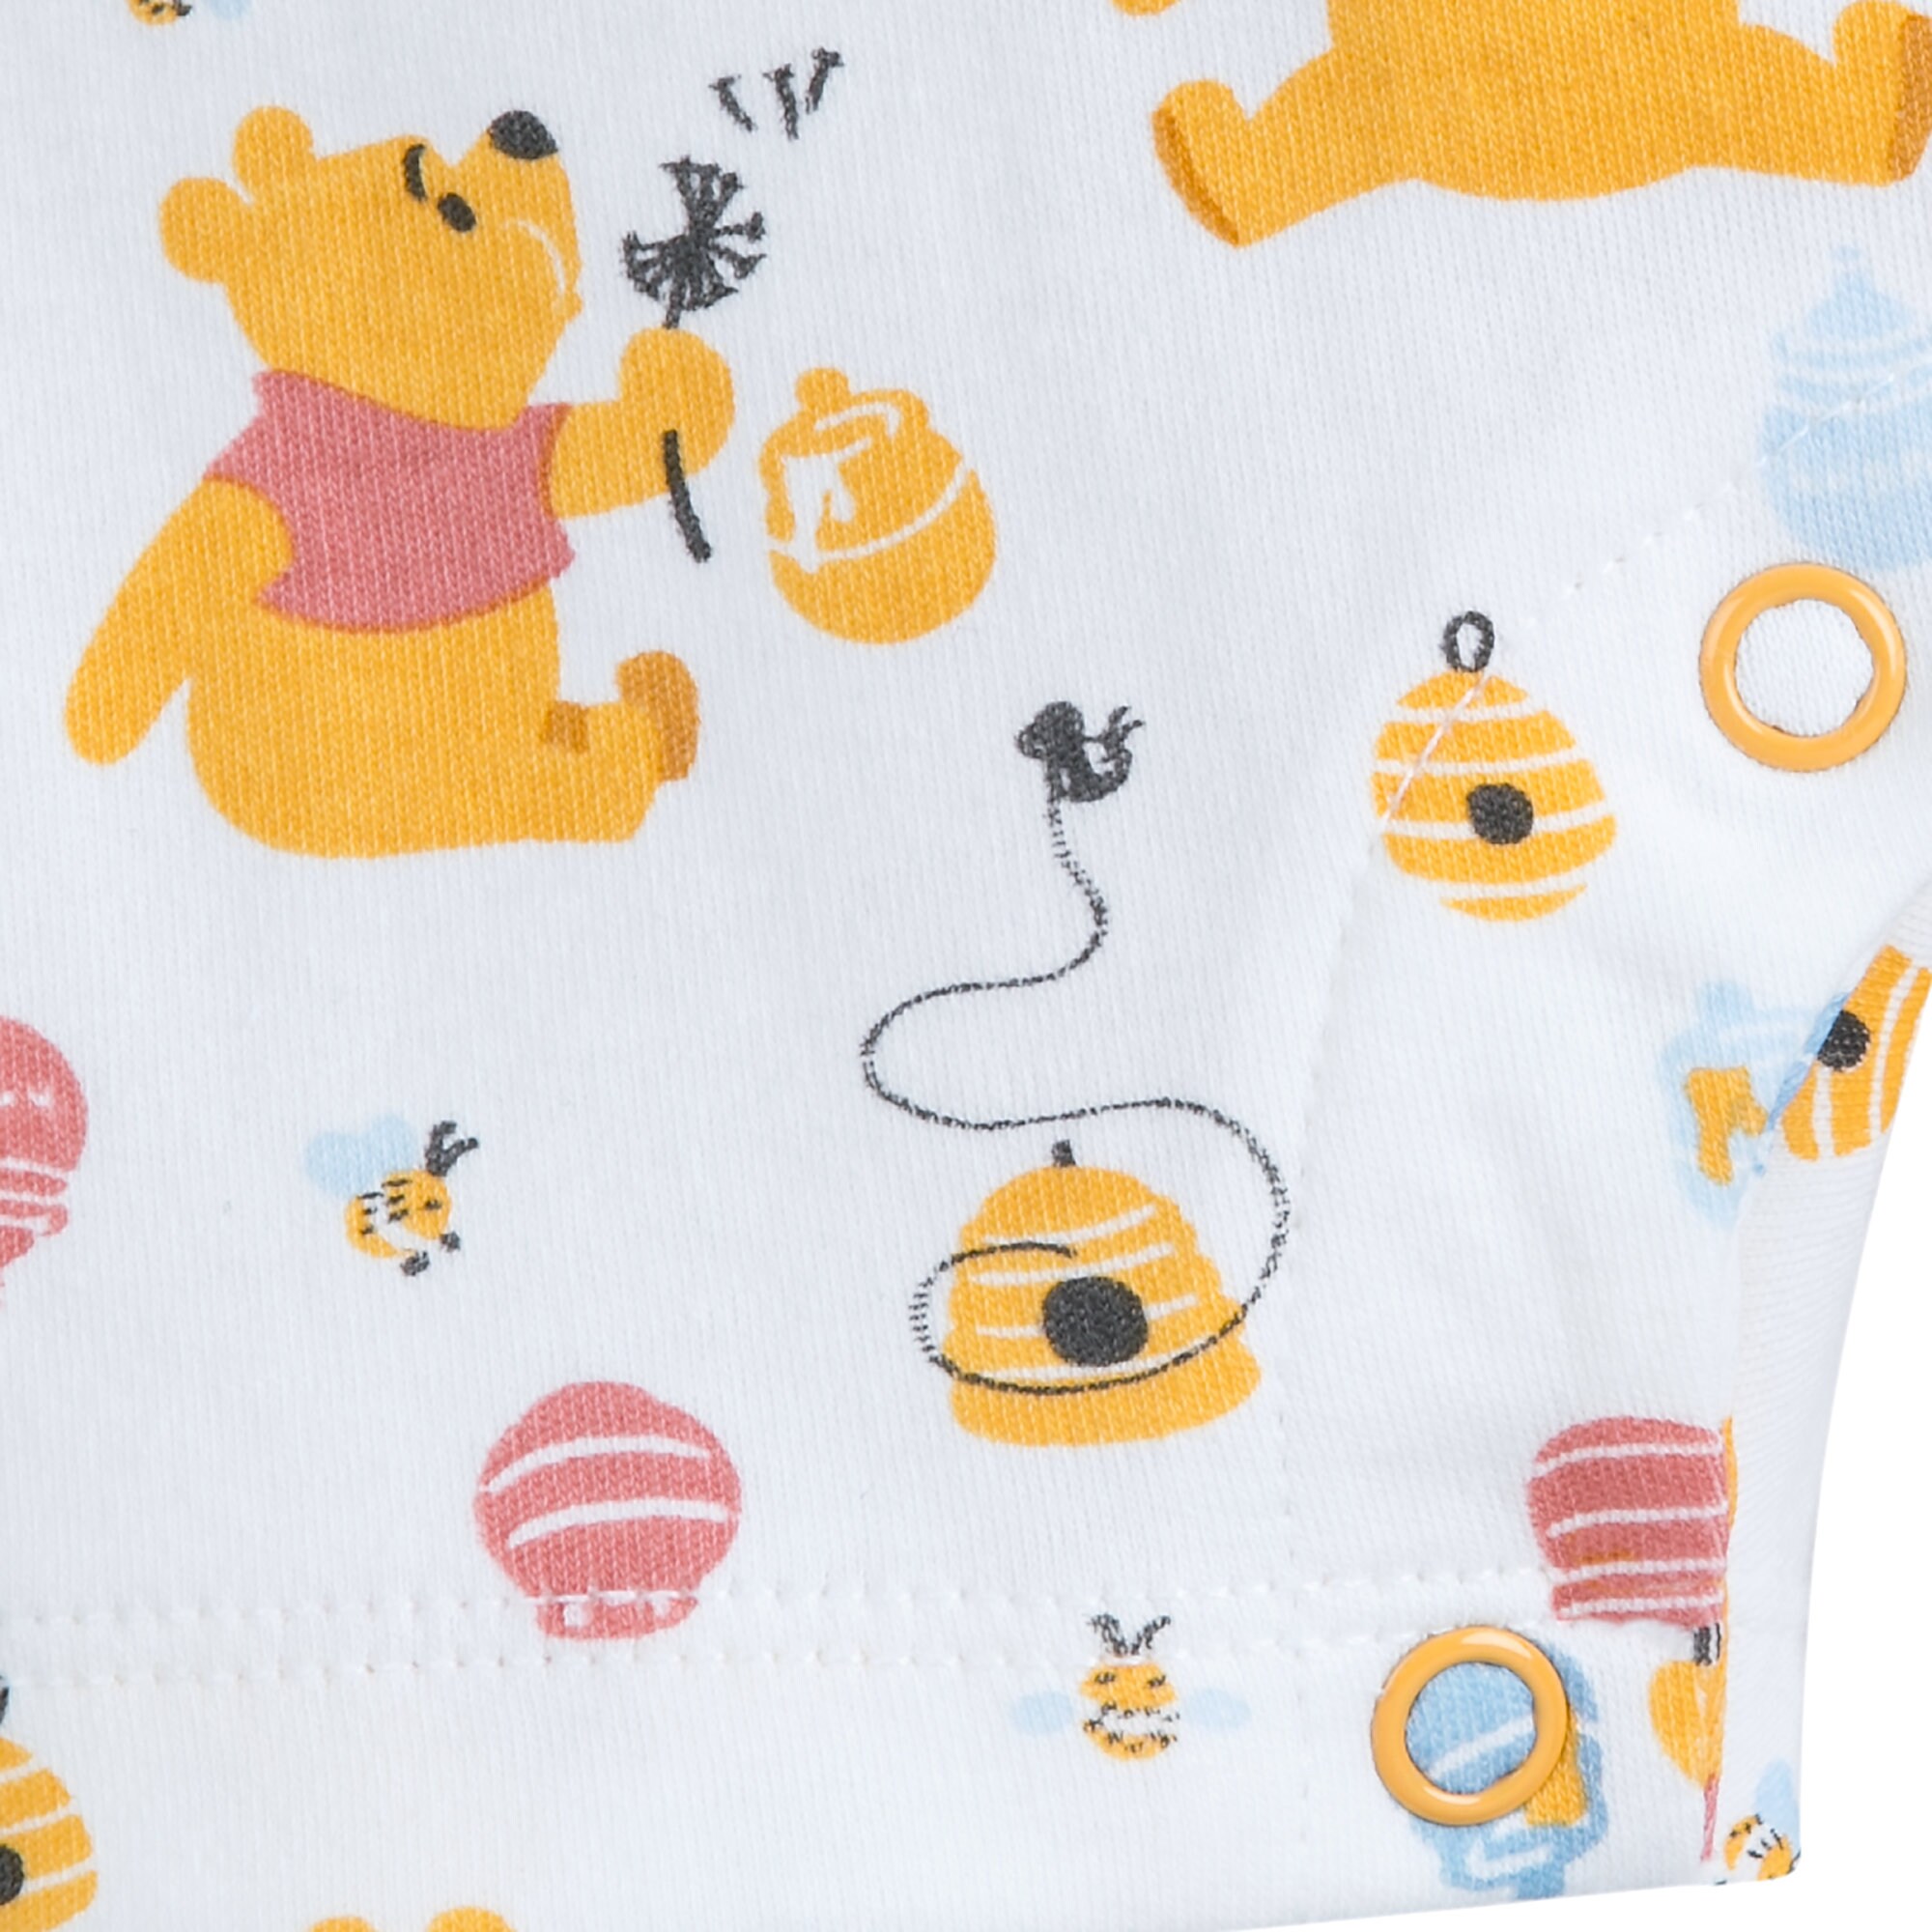 Winnie the Pooh Romper and Bib Set for Baby